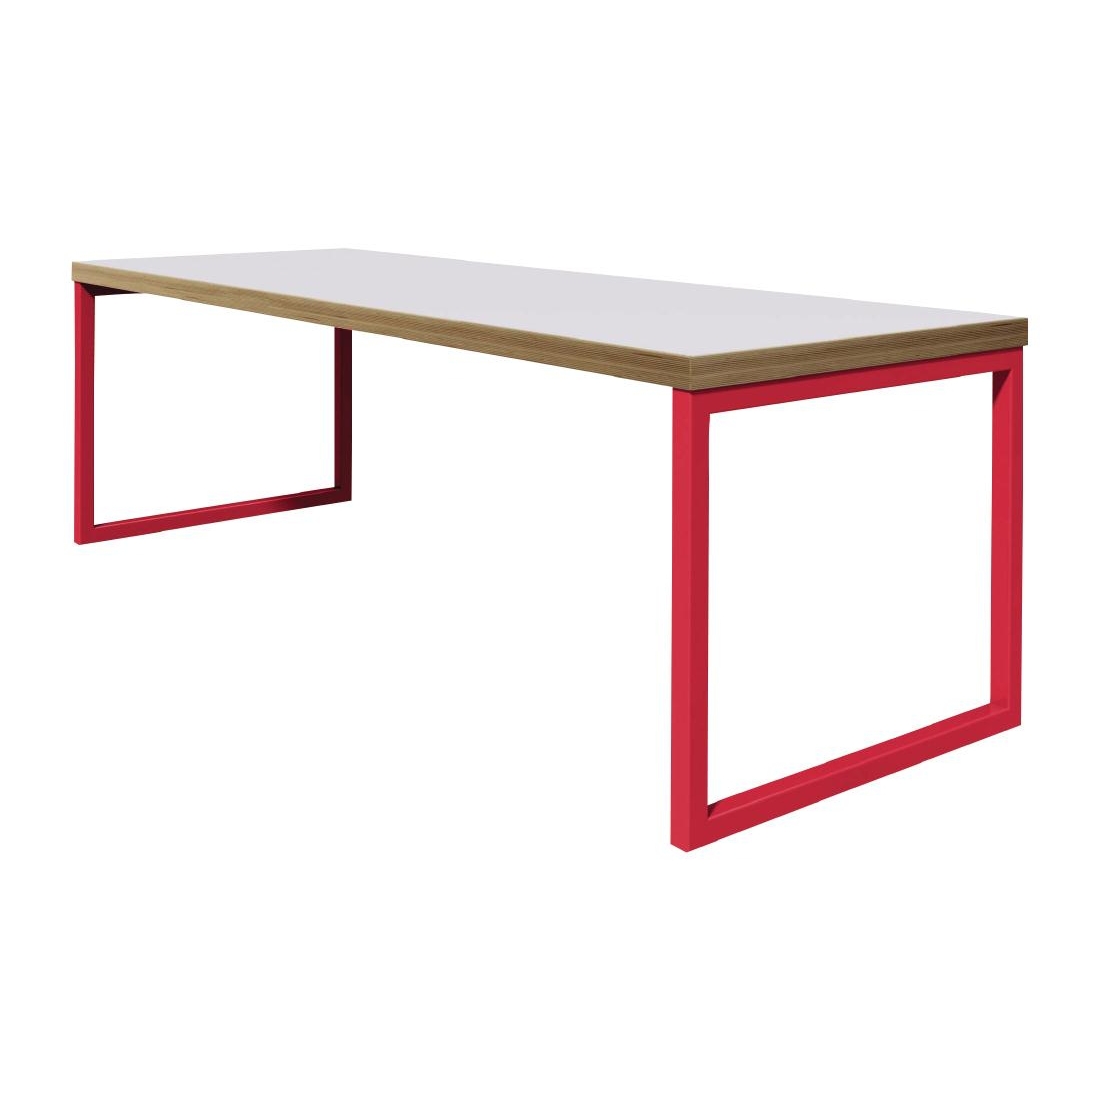 Bolero Dining Table White with Red Frame 6ft